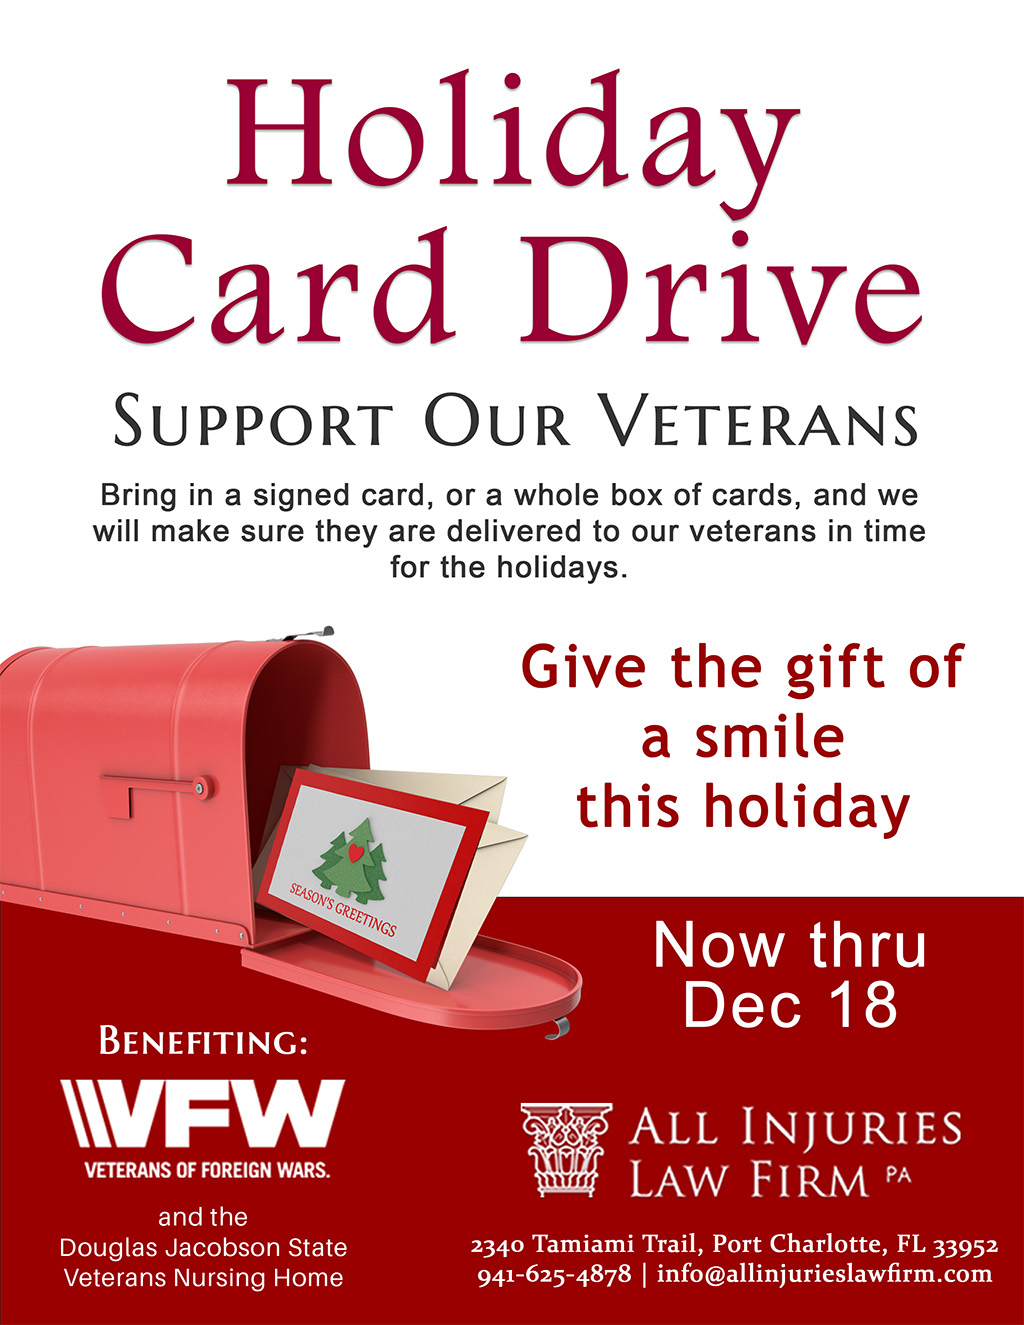 All Injuries Holiday Card Drive To Support Our Veterans